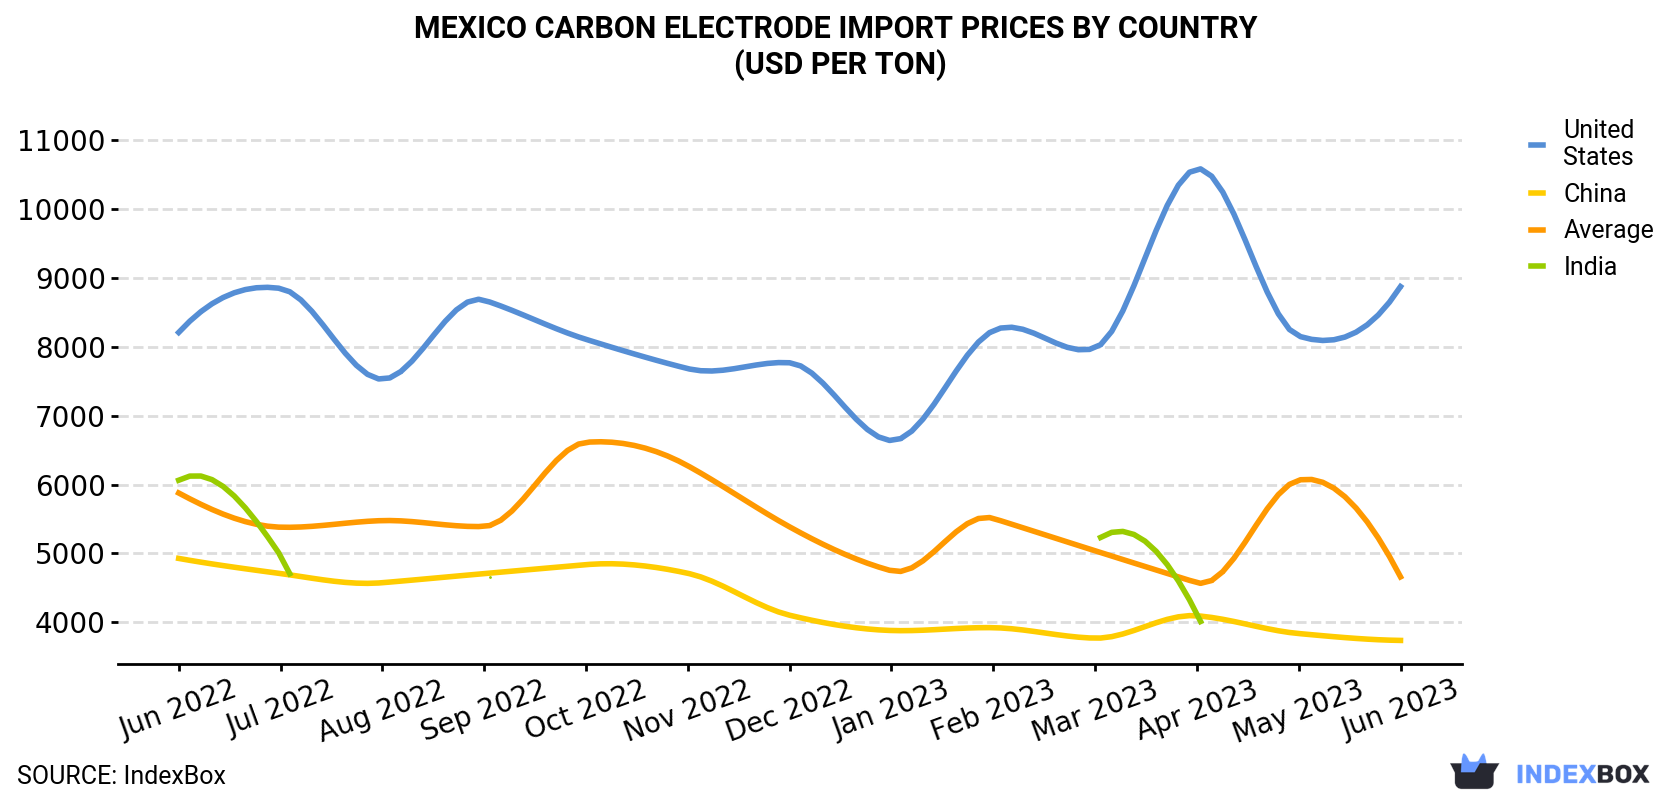 Mexico Carbon Electrode Import Prices By Country (USD Per Ton)